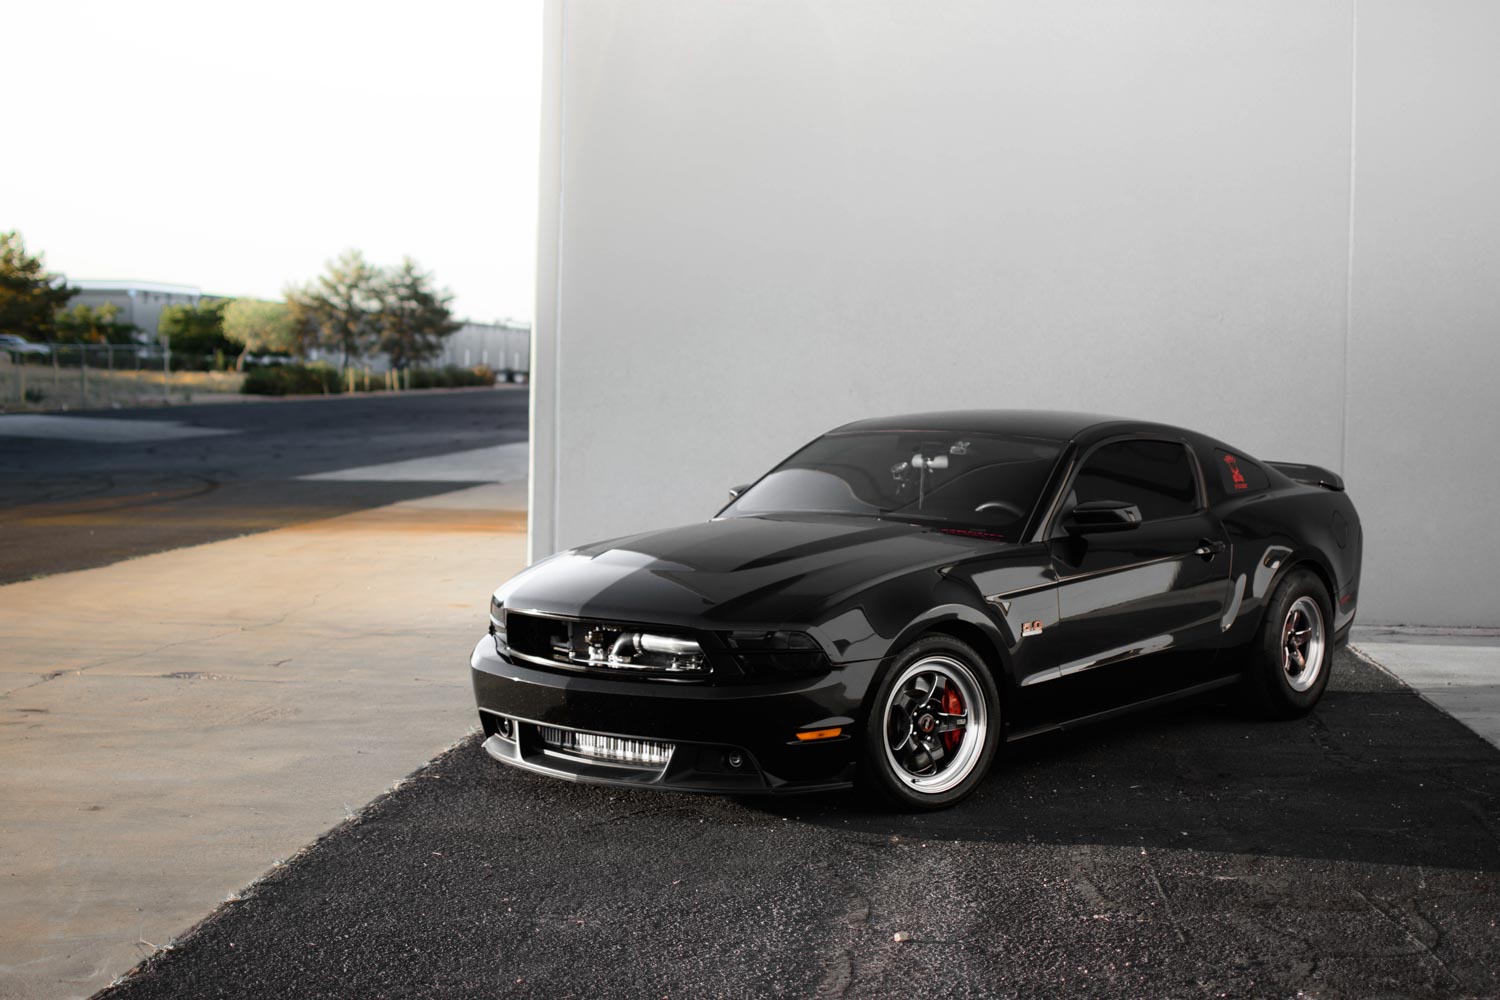 Ford Mustang - Weld S71 Forged Wheels